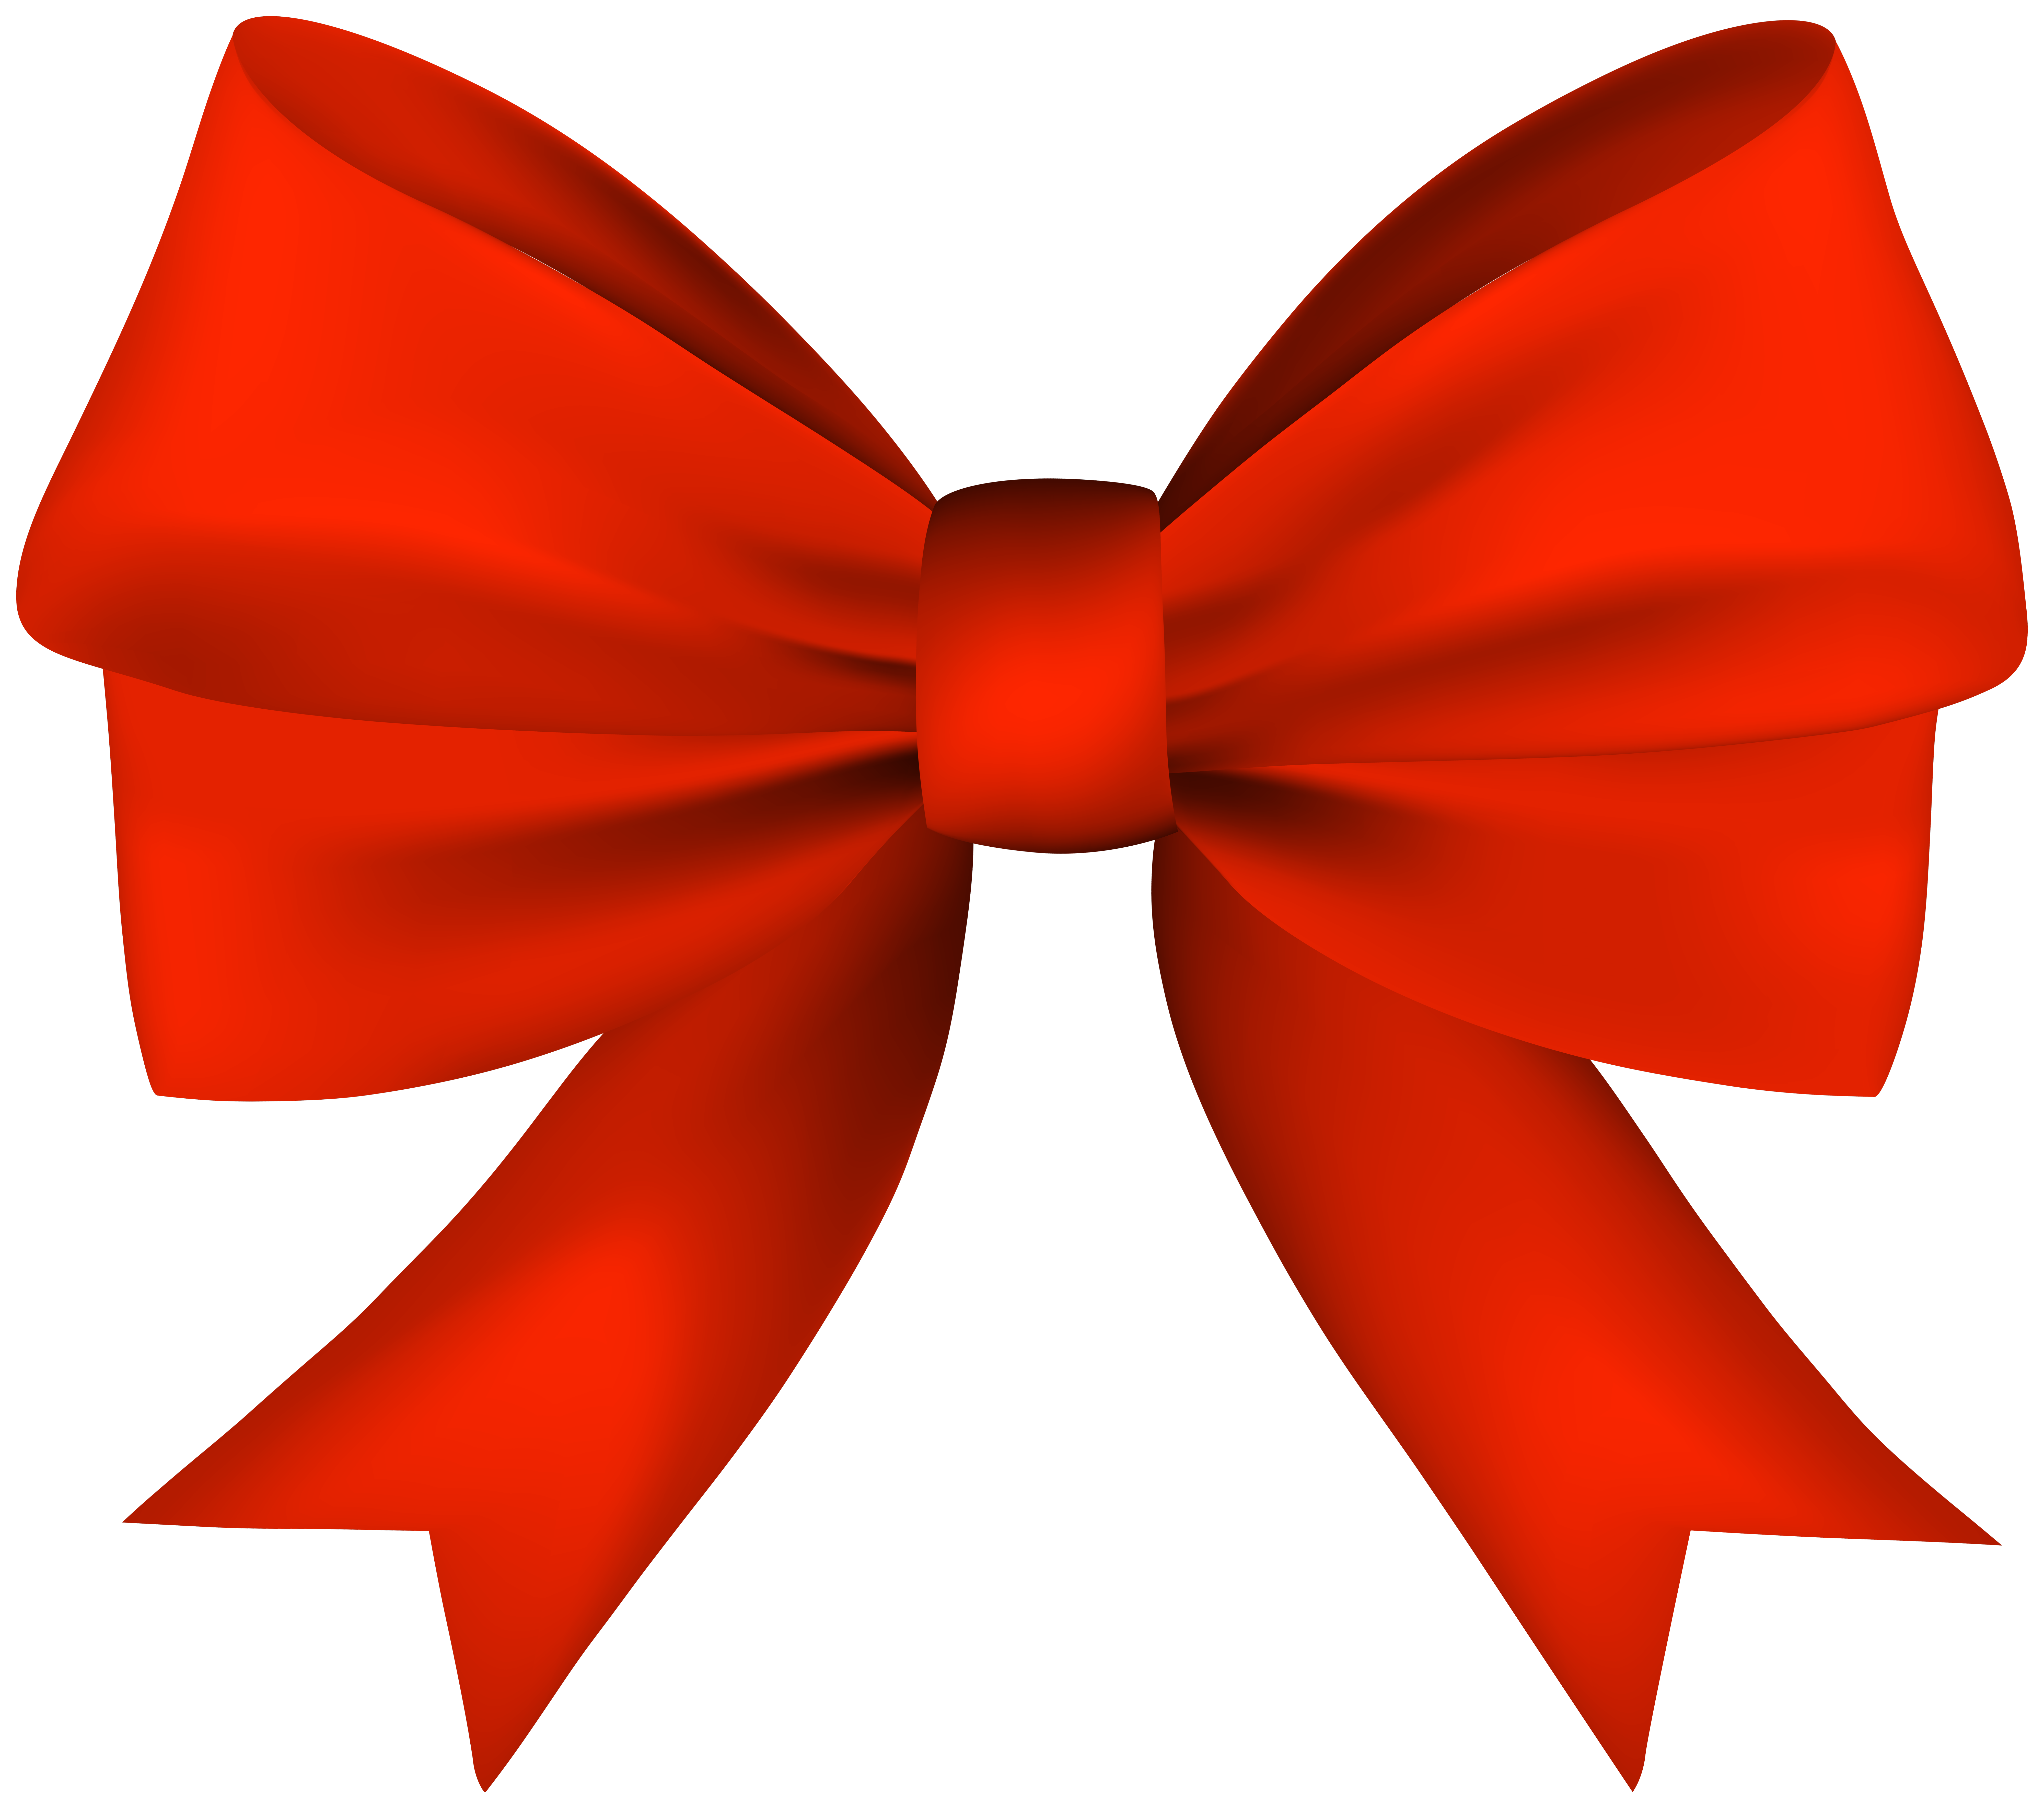 https://gallery.yopriceville.com/var/albums/Free-Clipart-Pictures/Ribbons-and-Banners-PNG/Decorative_Red_Bow_Clip_Art.png?m=1543888026